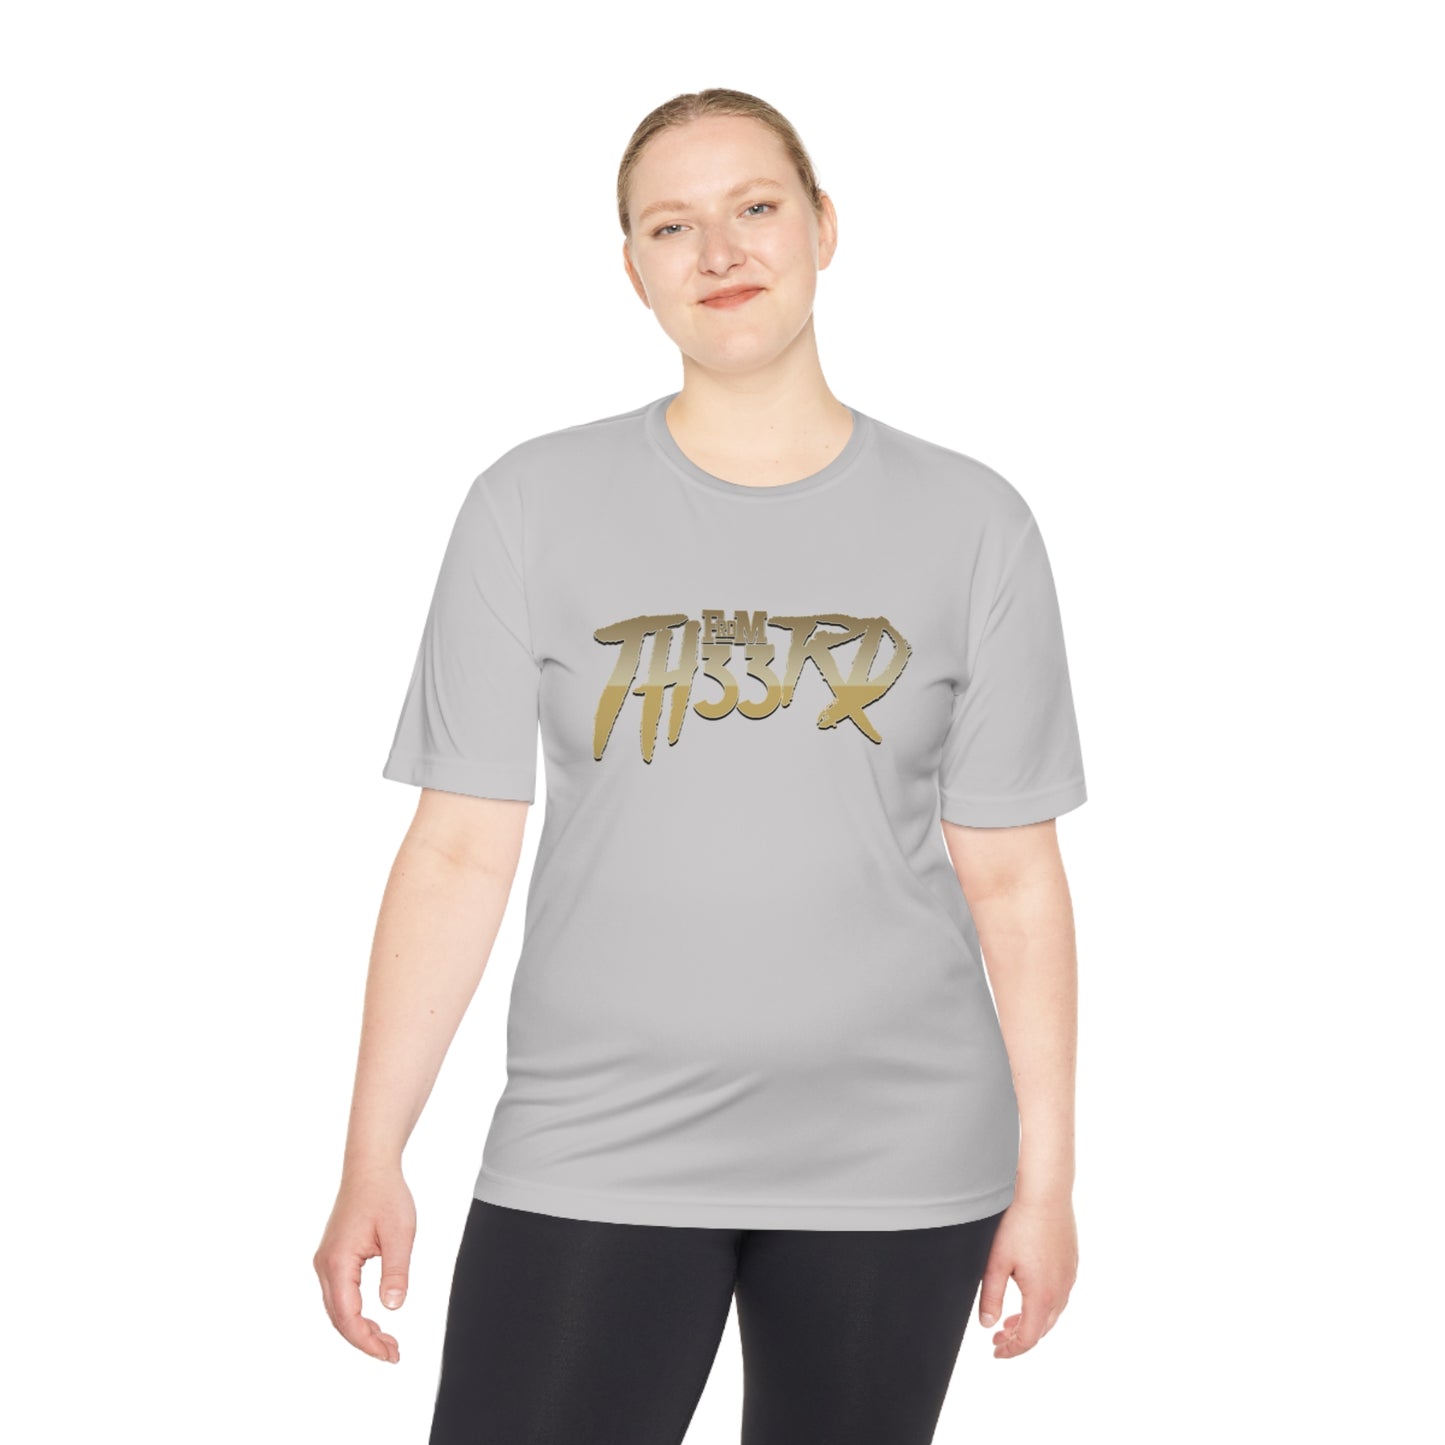 Fromth33rd Moisture Wicking Tee